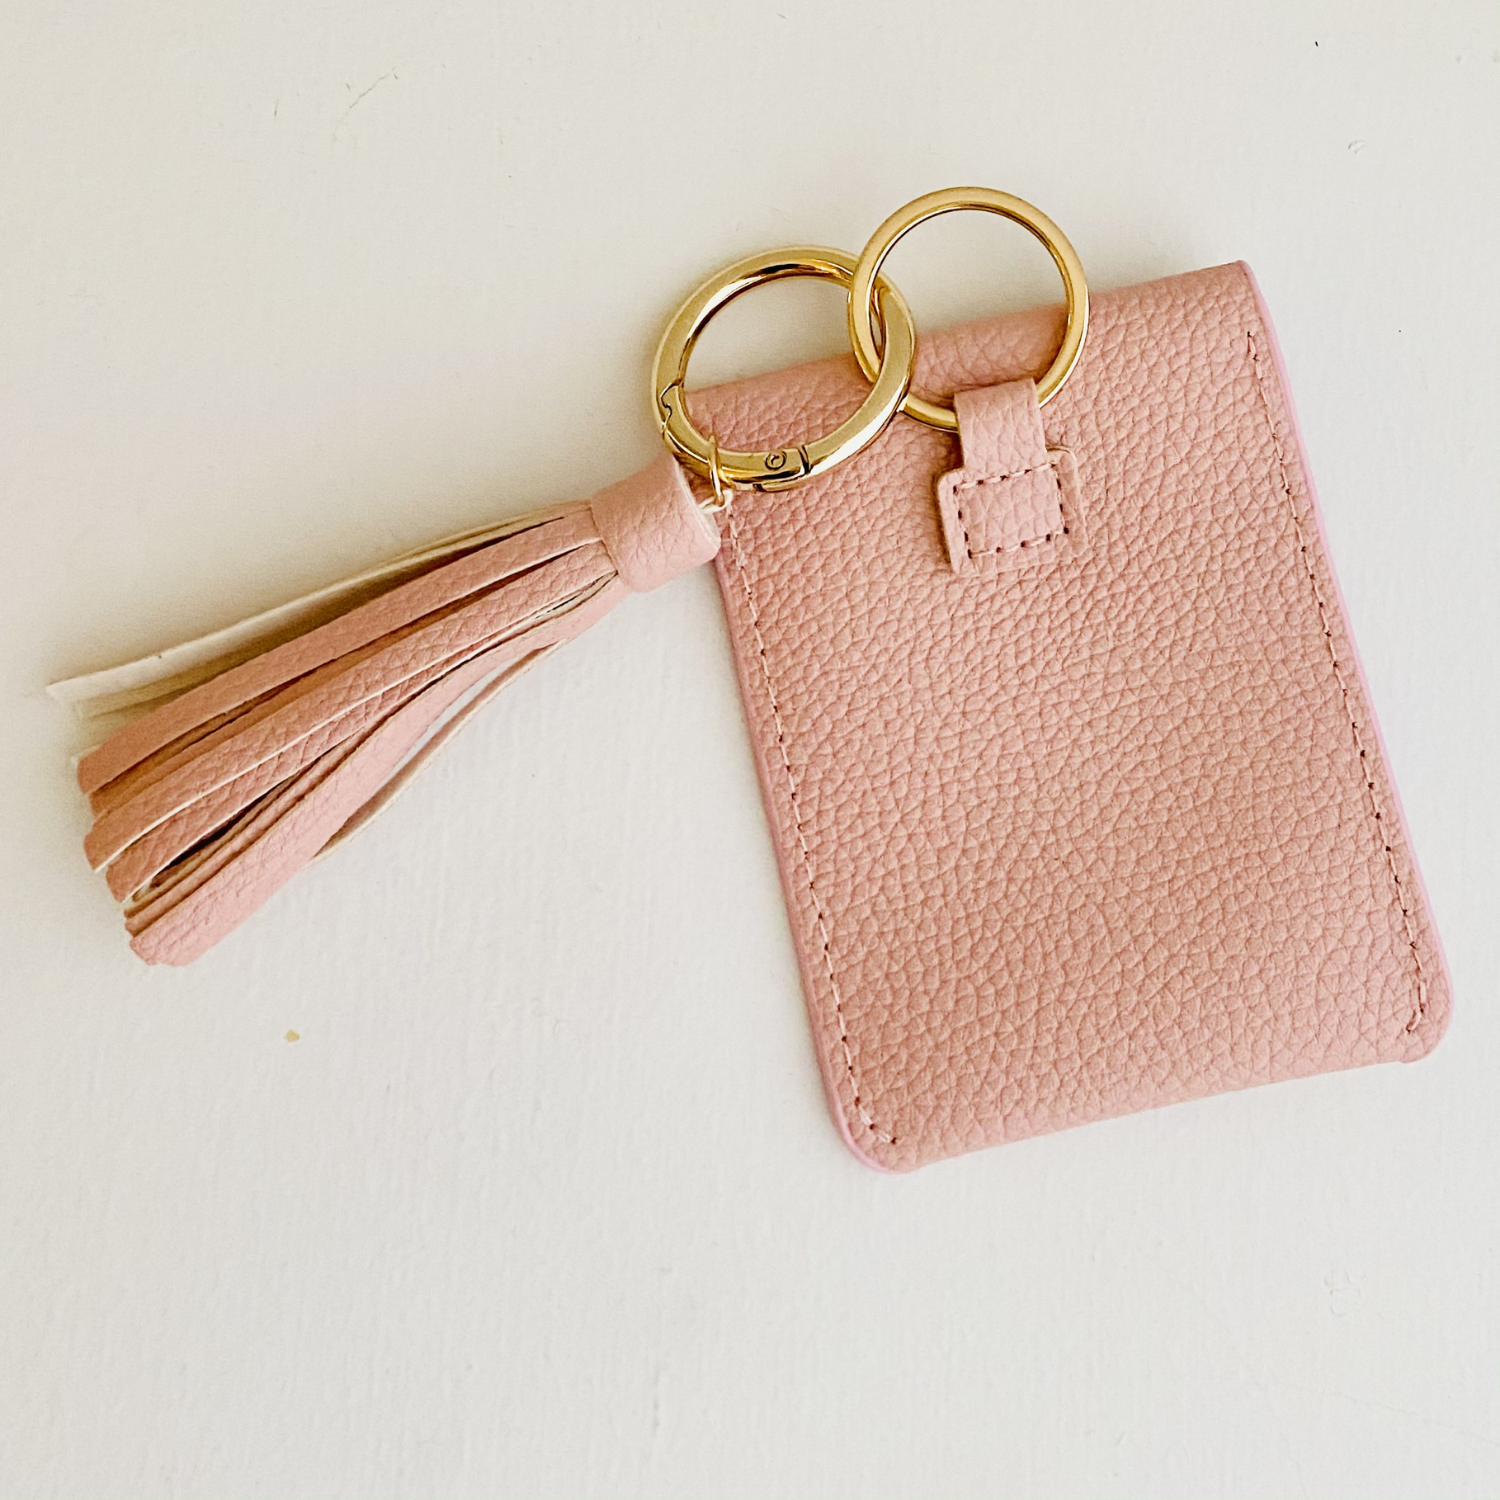 $10  Dupe For The 6 Key Holder And Mini Wallet